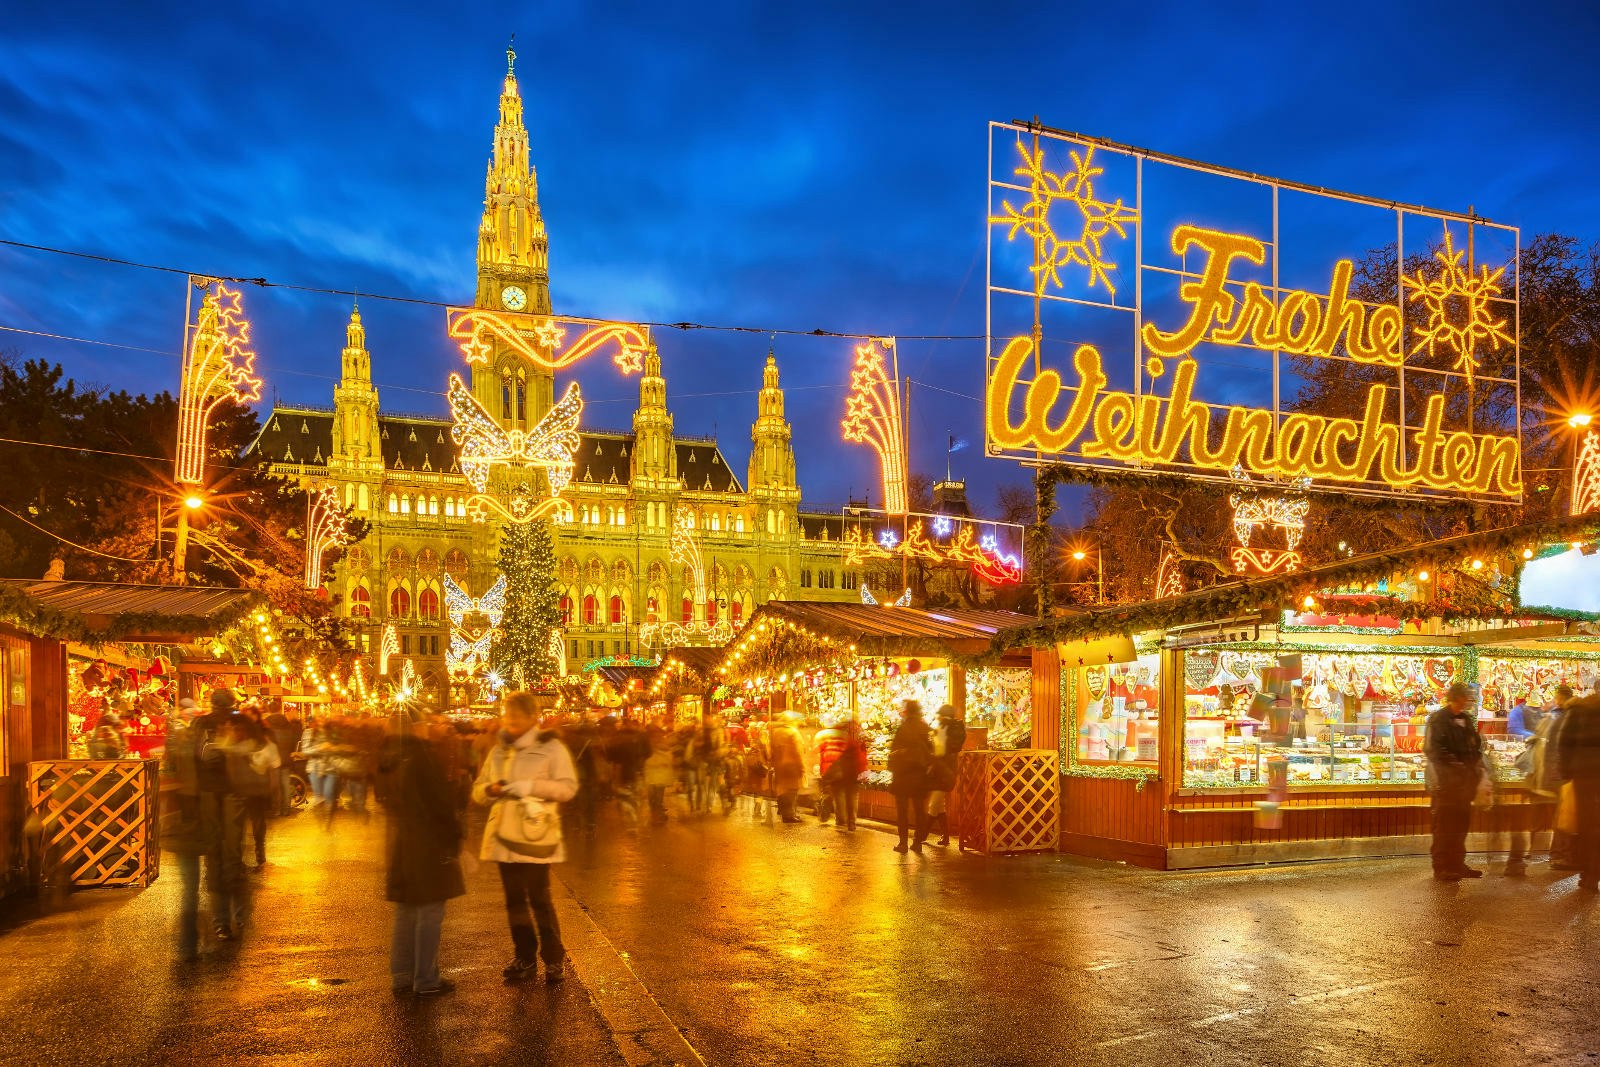 An illuminated Christmas market with a sign of lights spelling out Frohe Weihnachten, which means Merry Christmas in German